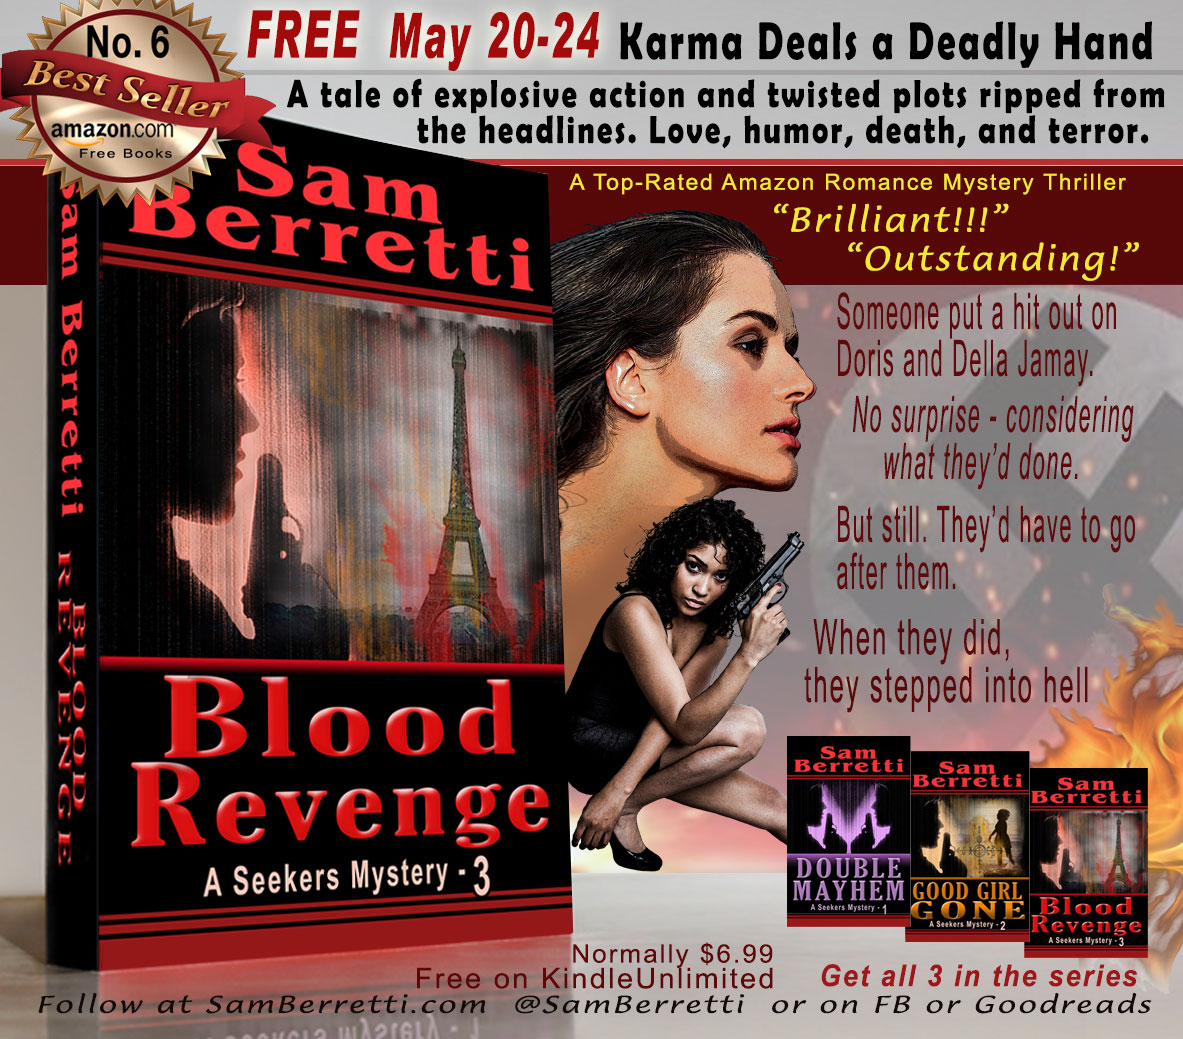 #WednesdayThought  
LAST DAY - Top-rated #FreeBook 

#Goodreads #AmReading #FreeKindleBook #KindleBookGiveaway #ThrillerBooks #Suspense #Mystery #GirlPower #ReadingCommunity #Bookworm #BookLovers #BYNR #BookClub #AmazonGiveaway #KindleBook

Here>> bit.ly/BloodRevng